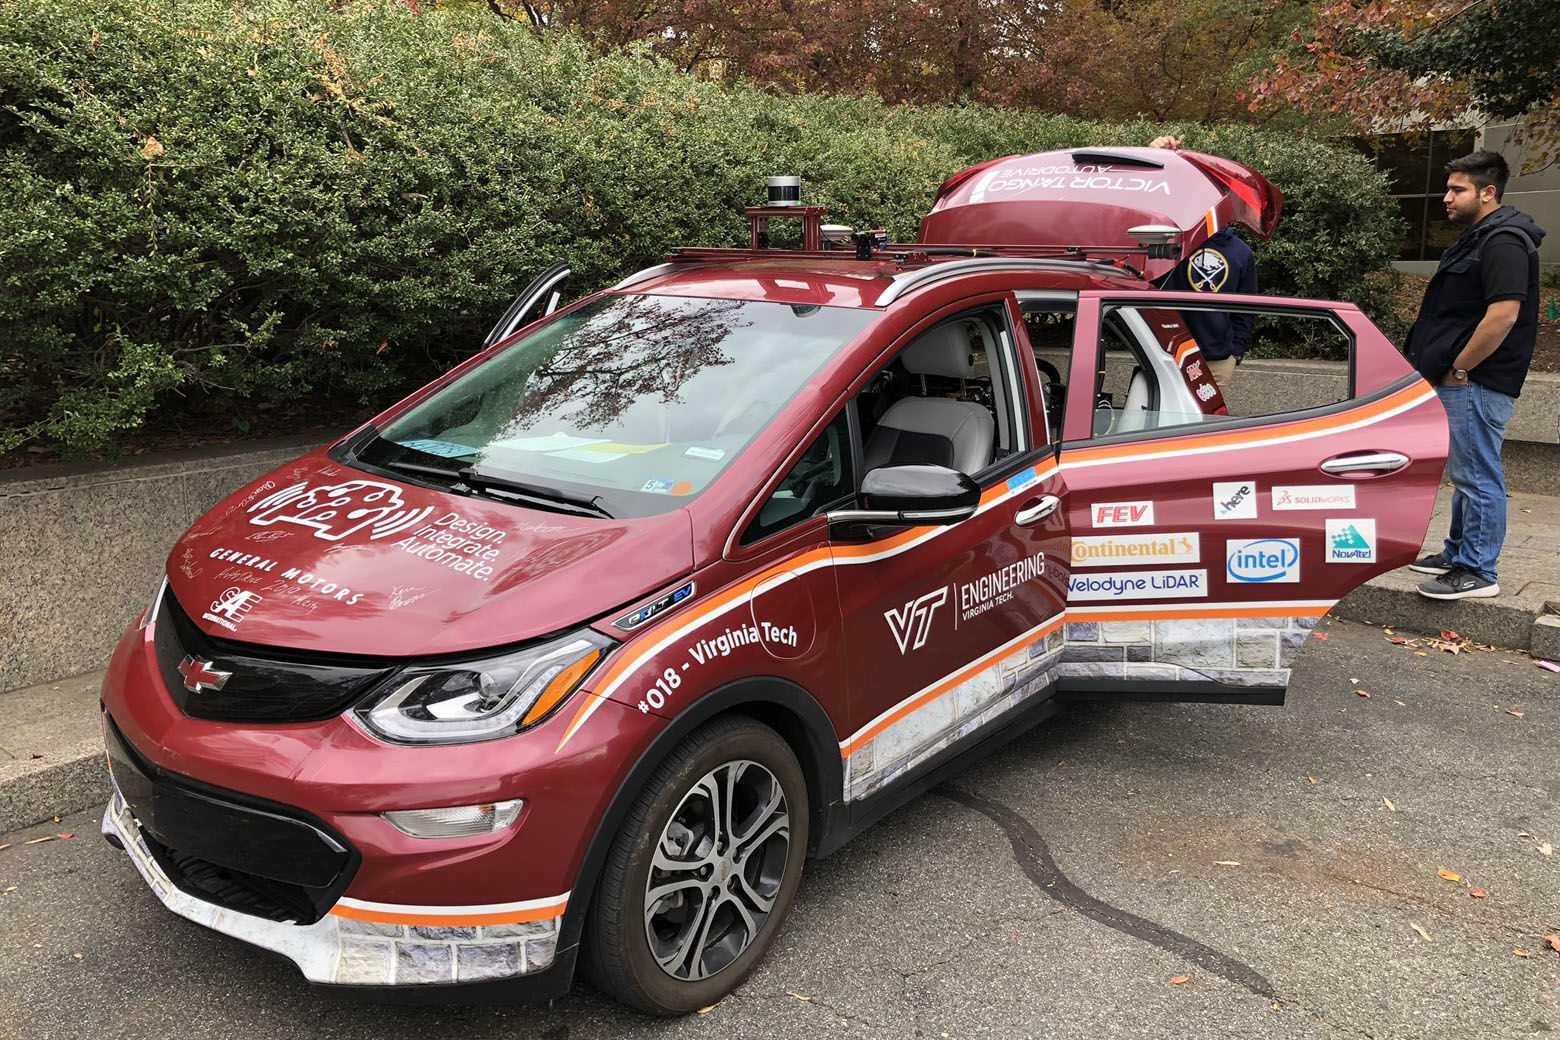 Virginia Tech's self-driving car model is part of a national competition between schools to develop a fully autonomous vehicle. (WTOP/John Aaron)